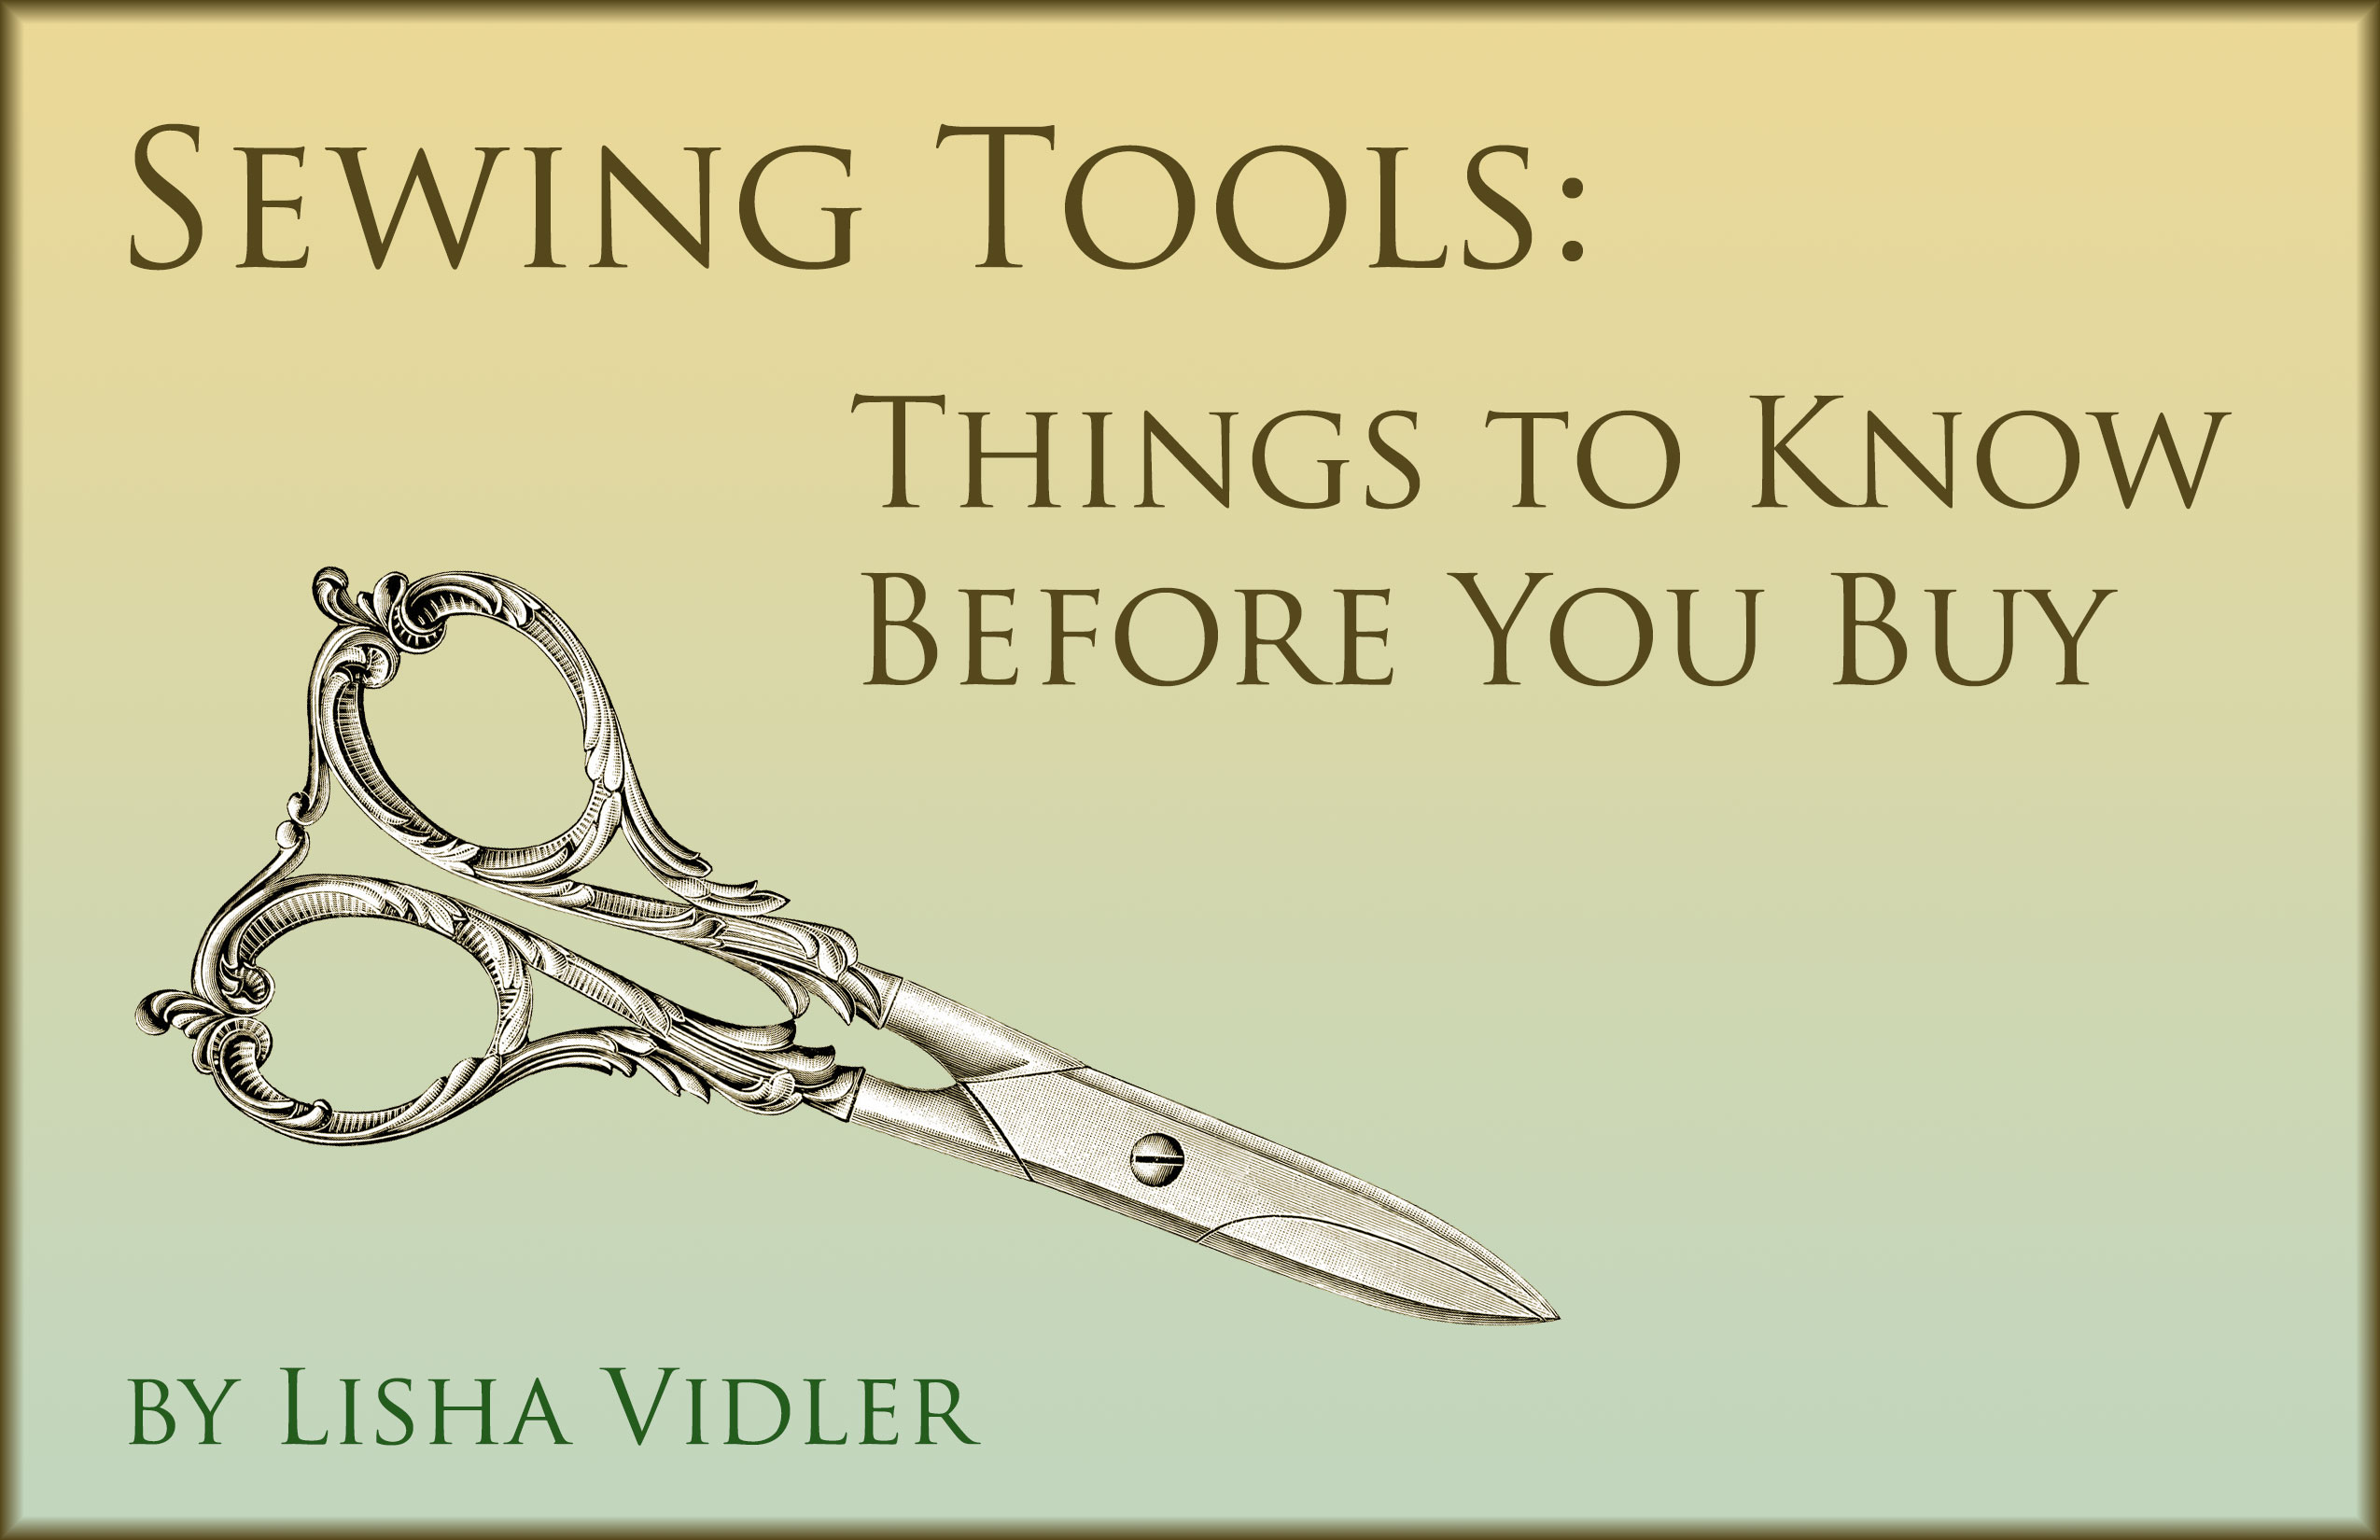 Sewing Tools and Their Uses